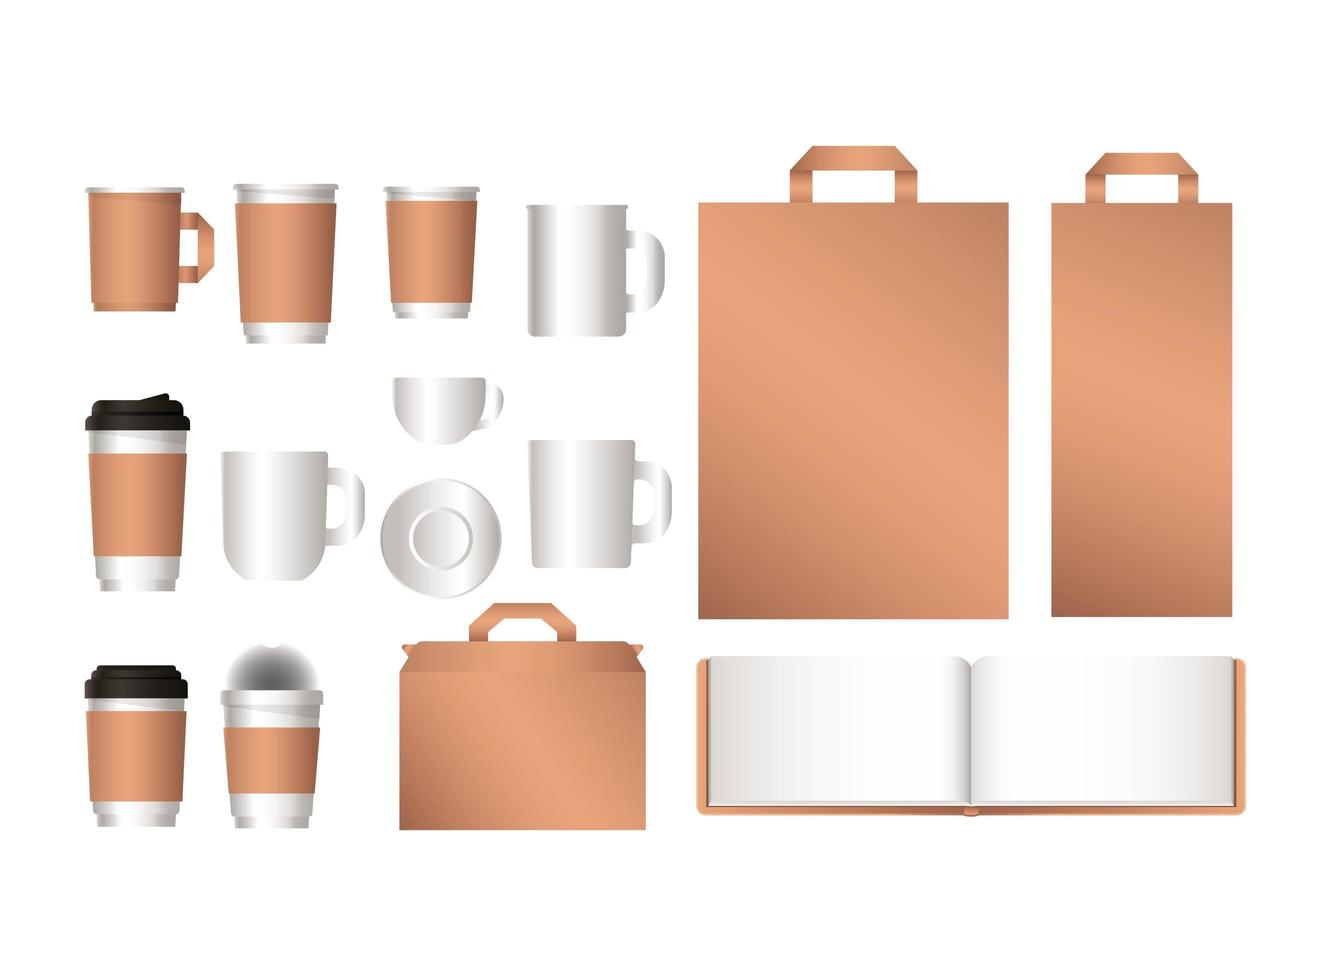 Mockup notebook bags and coffee mugs design vector